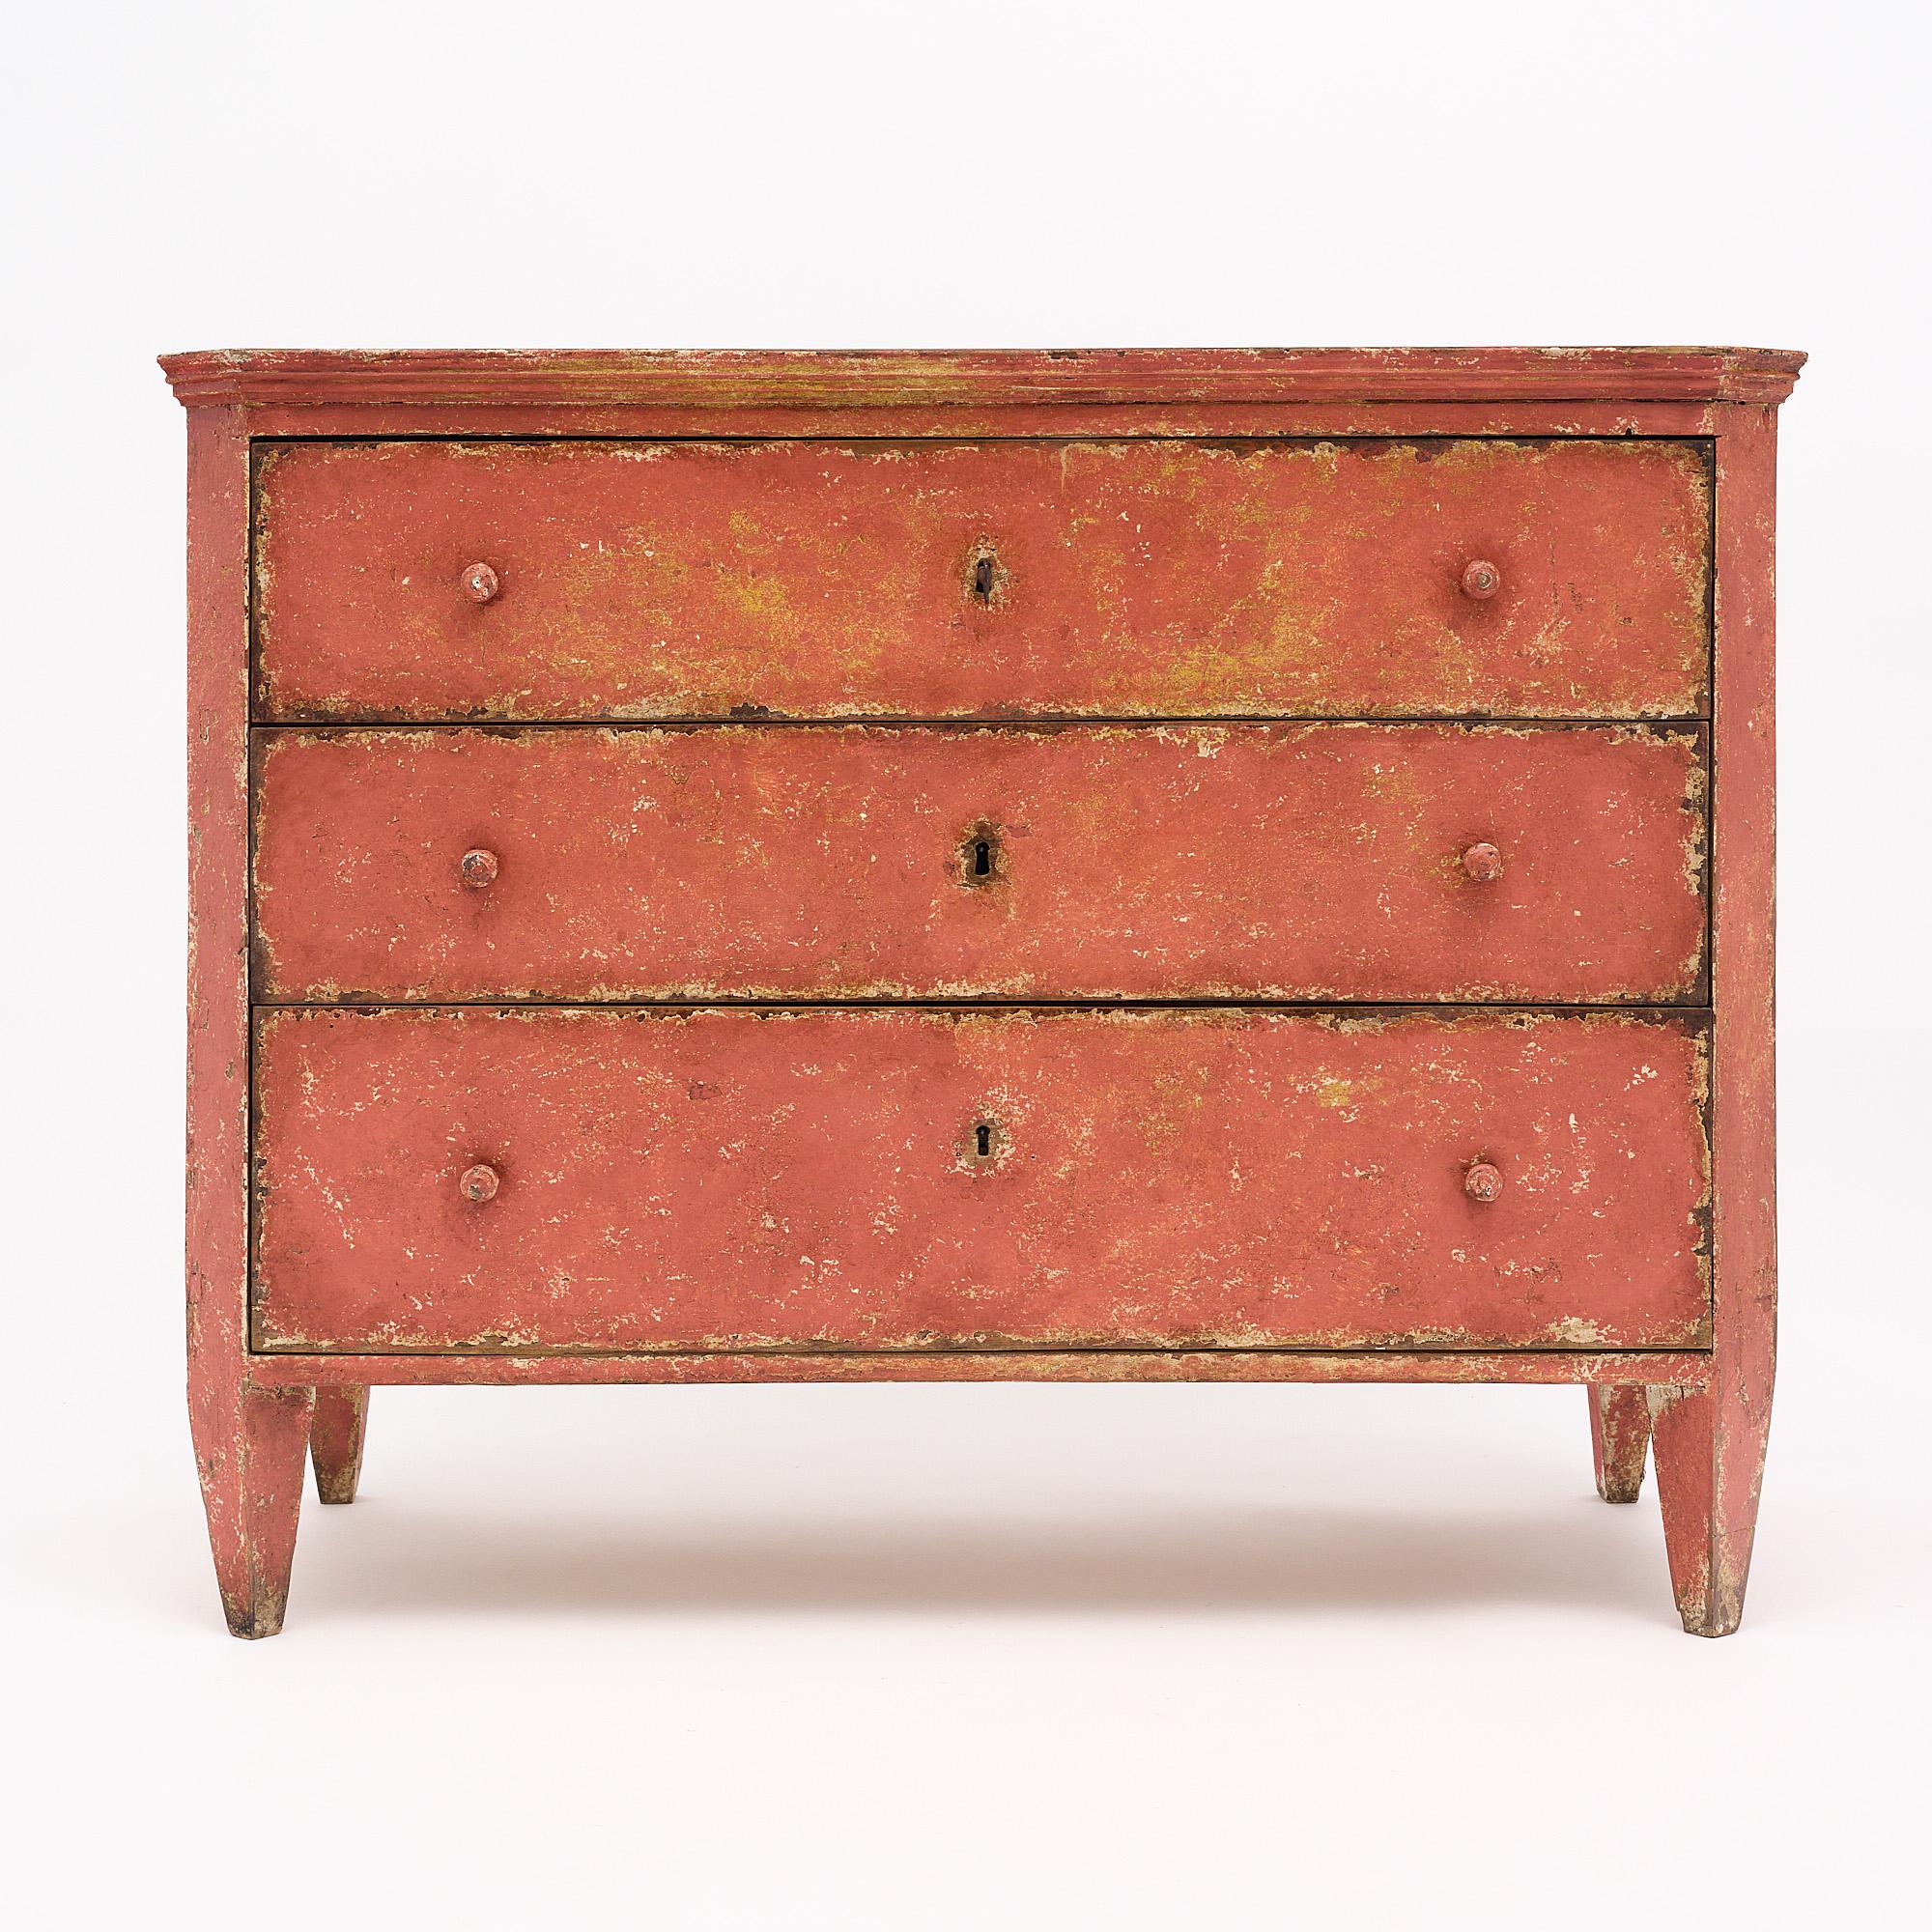 Chest from Spain featuring the original salmon colored paint and wonderful patina. The paint has wear consistent with age and shows a beautiful warm undertone beneath. The knobs are wood and match the chest. It is supported by tapered legs. The